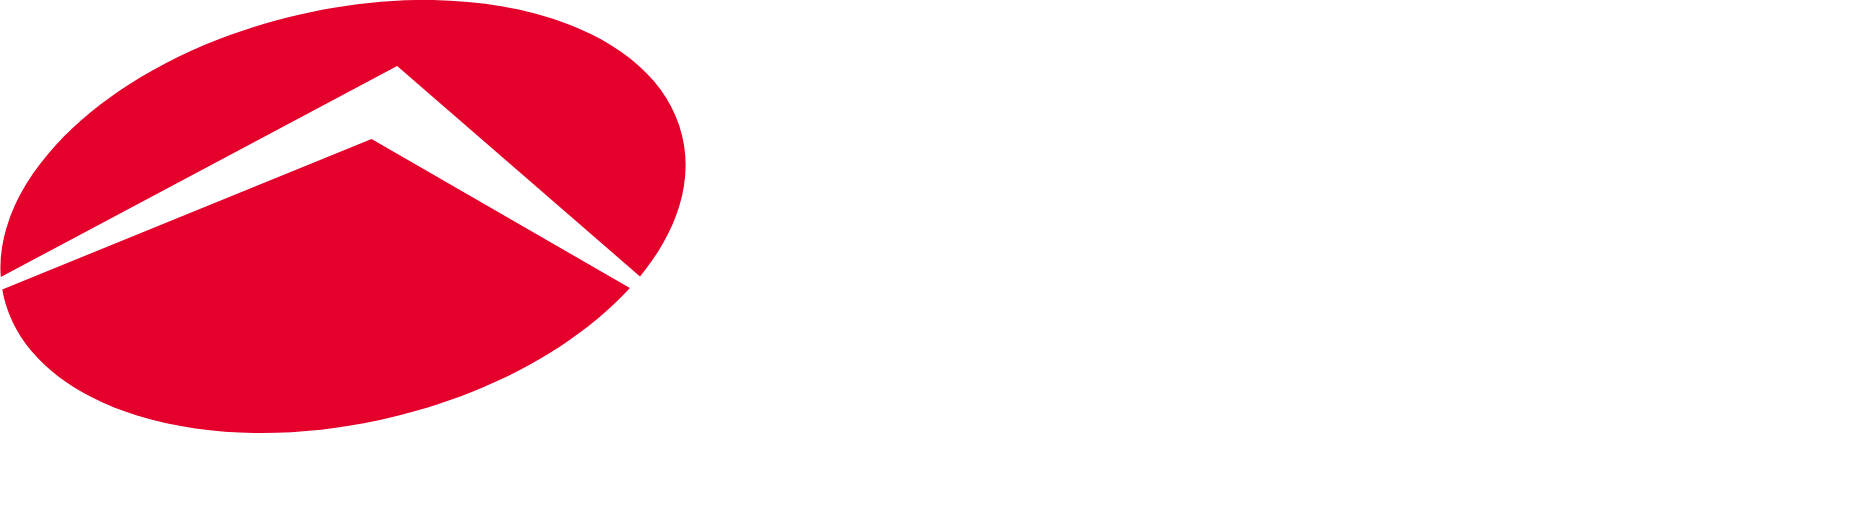 ATI Physical Therapy logo in transparent PNG and vectorized SVG formats